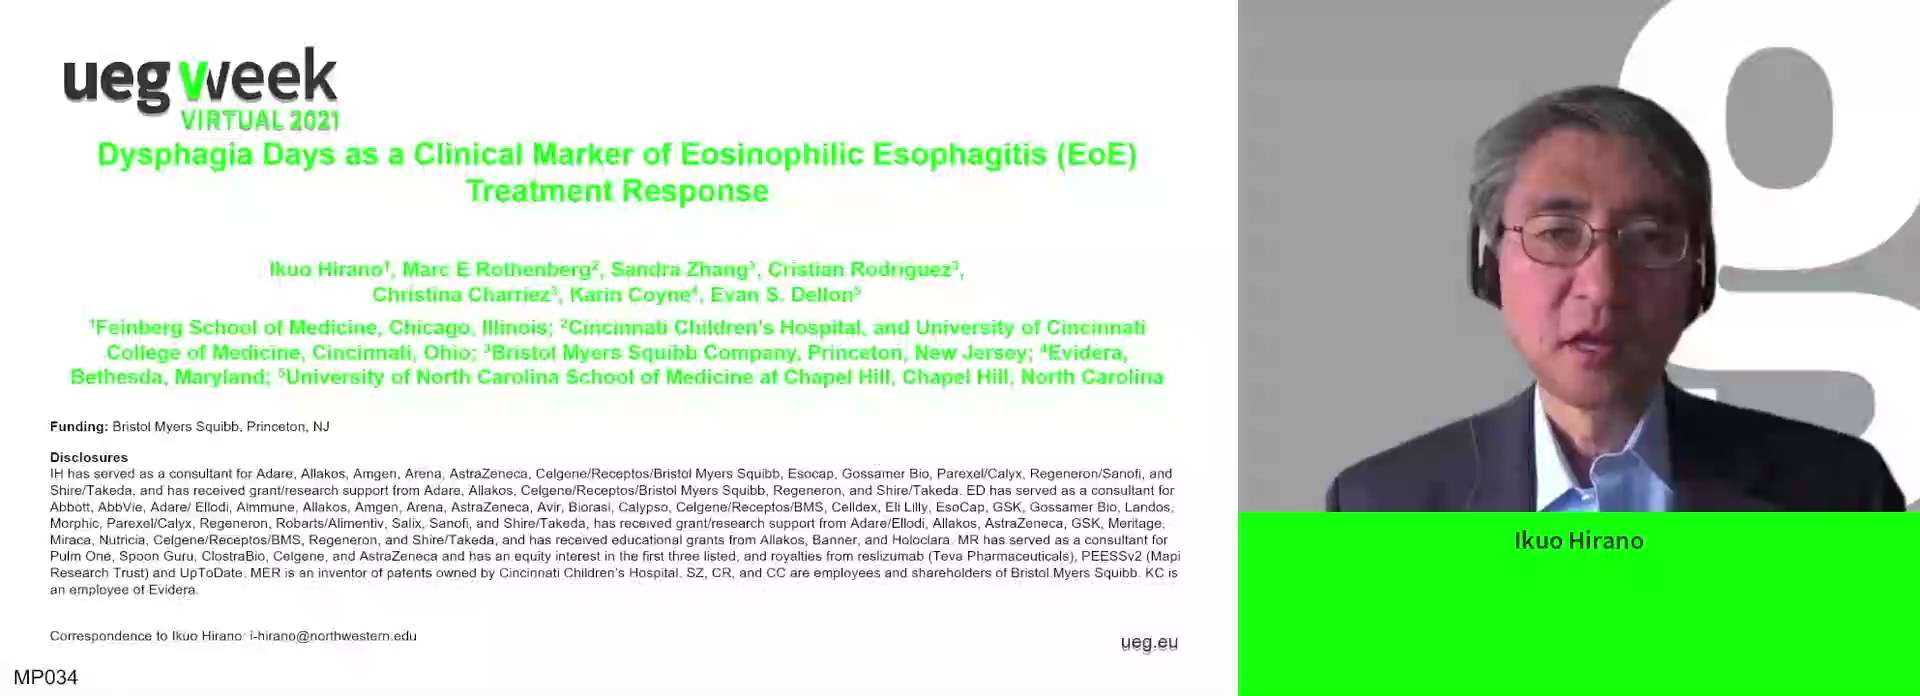 DYSPHAGIA DAYS AS A CLINICAL MARKER OF EOE TREATMENT RESPONSE